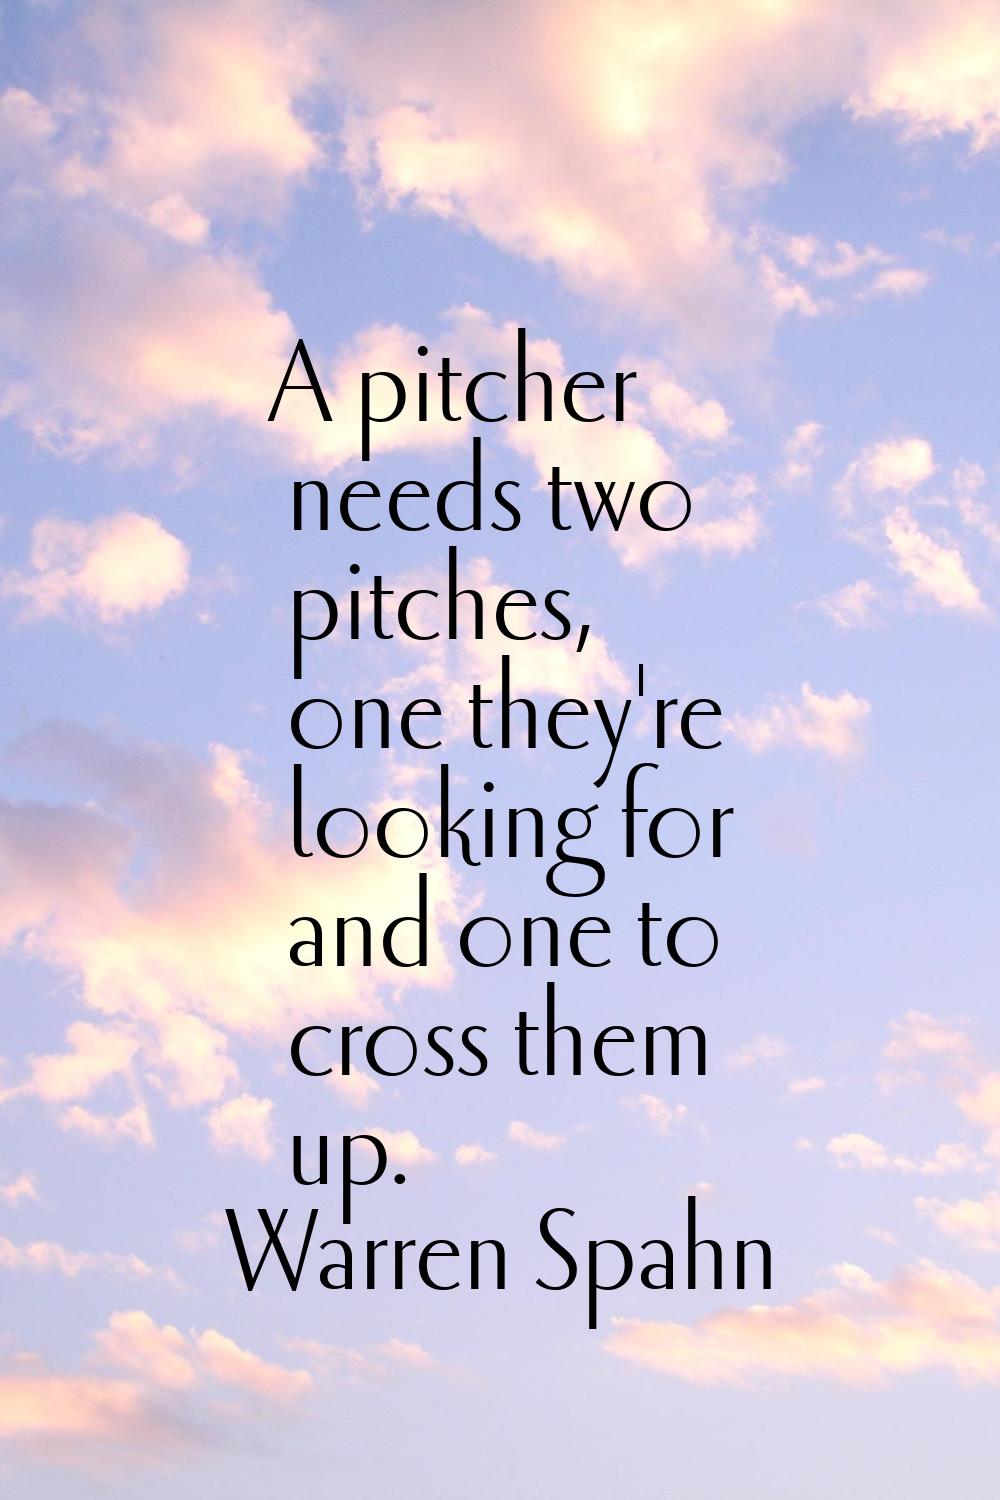 A pitcher needs two pitches, one they're looking for and one to cross them up.